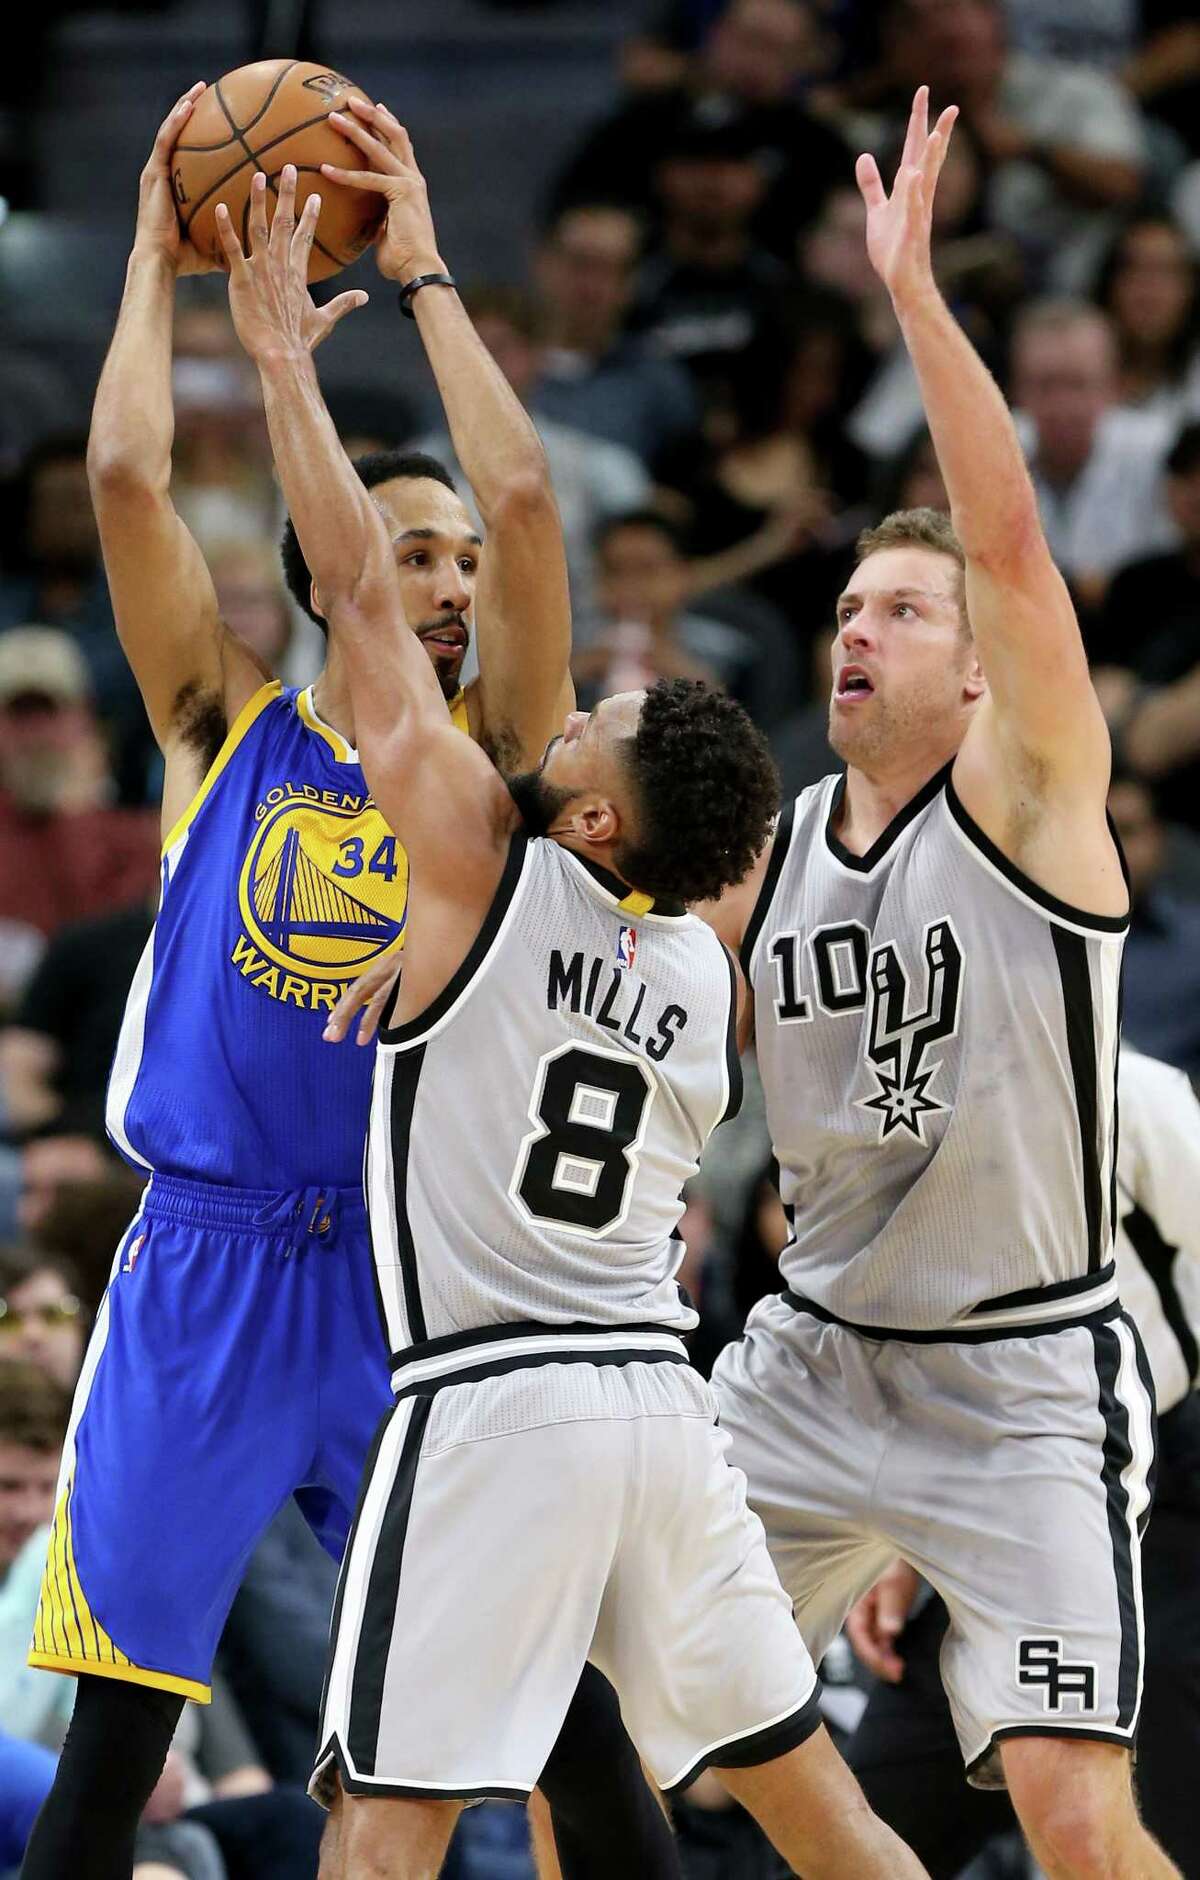 Golden State Warriors' Shaun Livingston is defended by San Antonio Spurs' Patty Mills and David Lee during first half action Saturday March 11, 2017 at the AT&T Center.